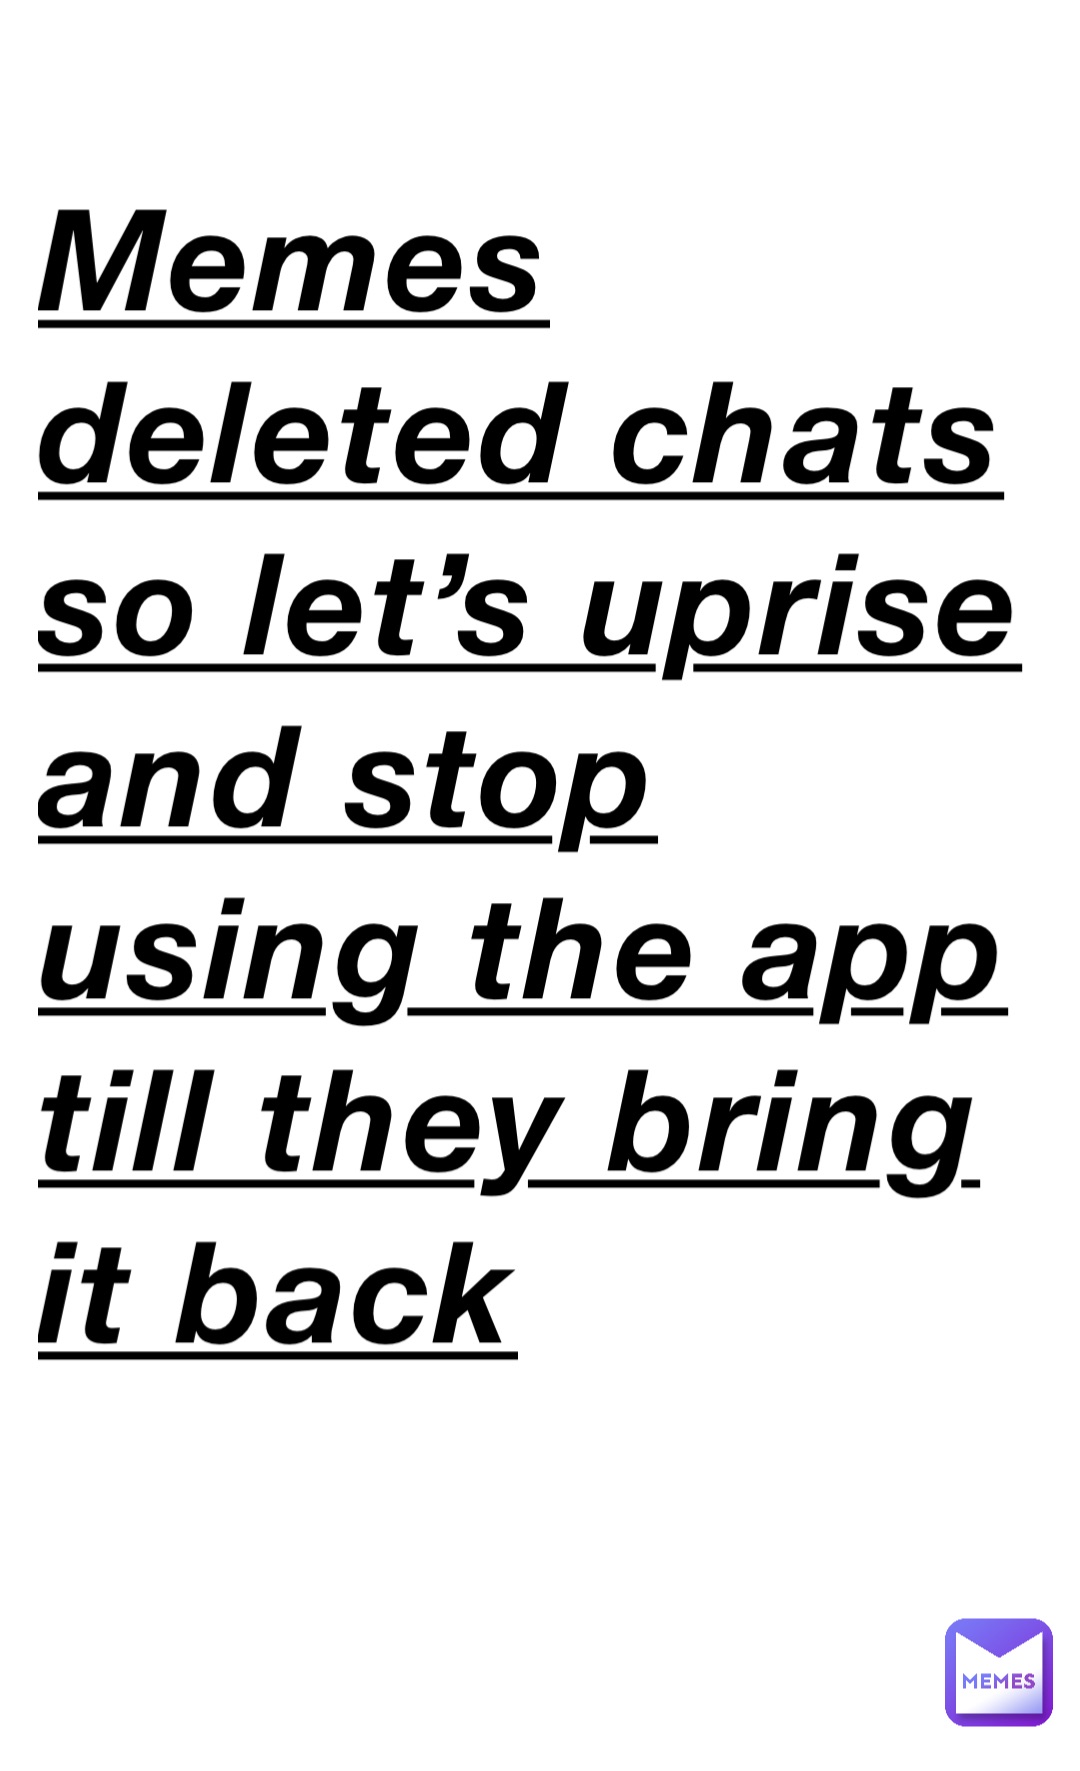 Memes deleted chats so let’s uprise and stop using the app till they bring it back